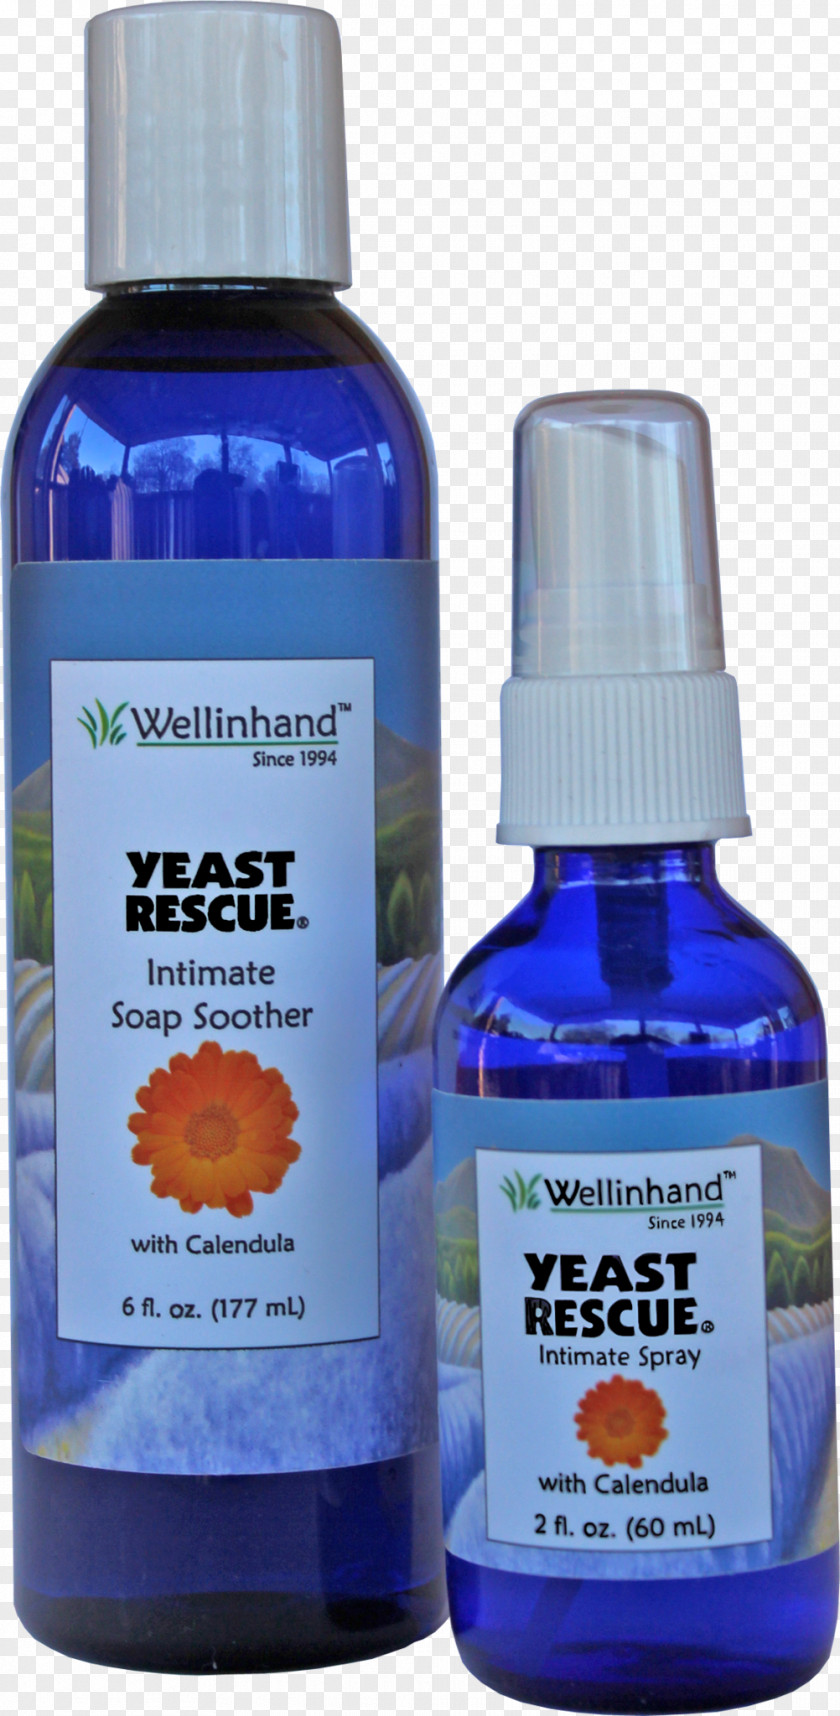 YEAST Yeast Fluid Ounce Wellinhand Action Remedies Therapy PNG